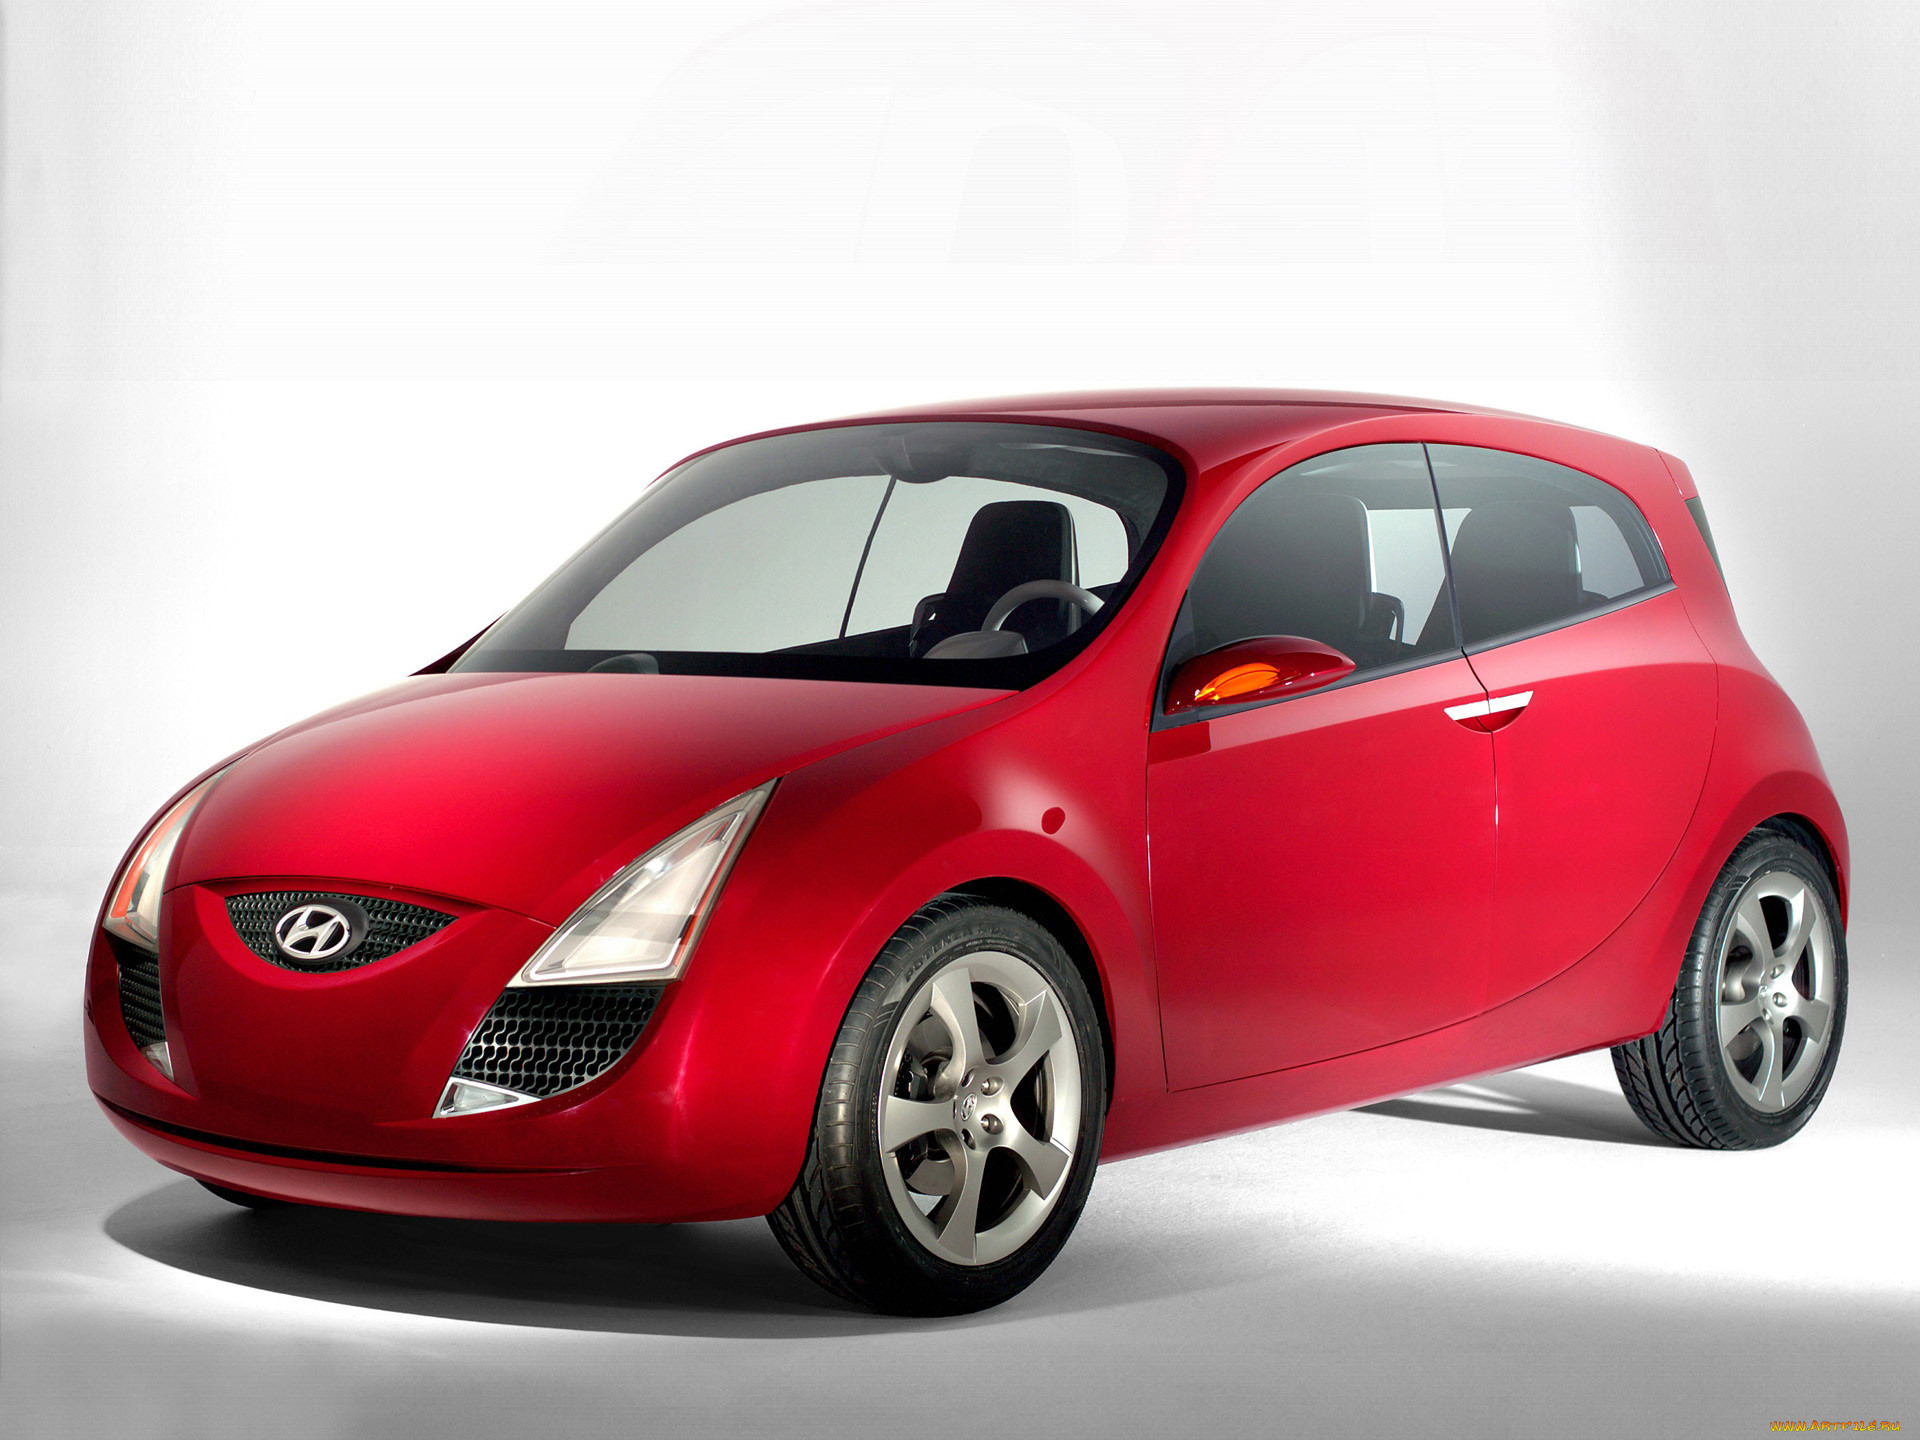 hyundai hed-1 concept 2005, , hyundai, hed-1, concept, 2005